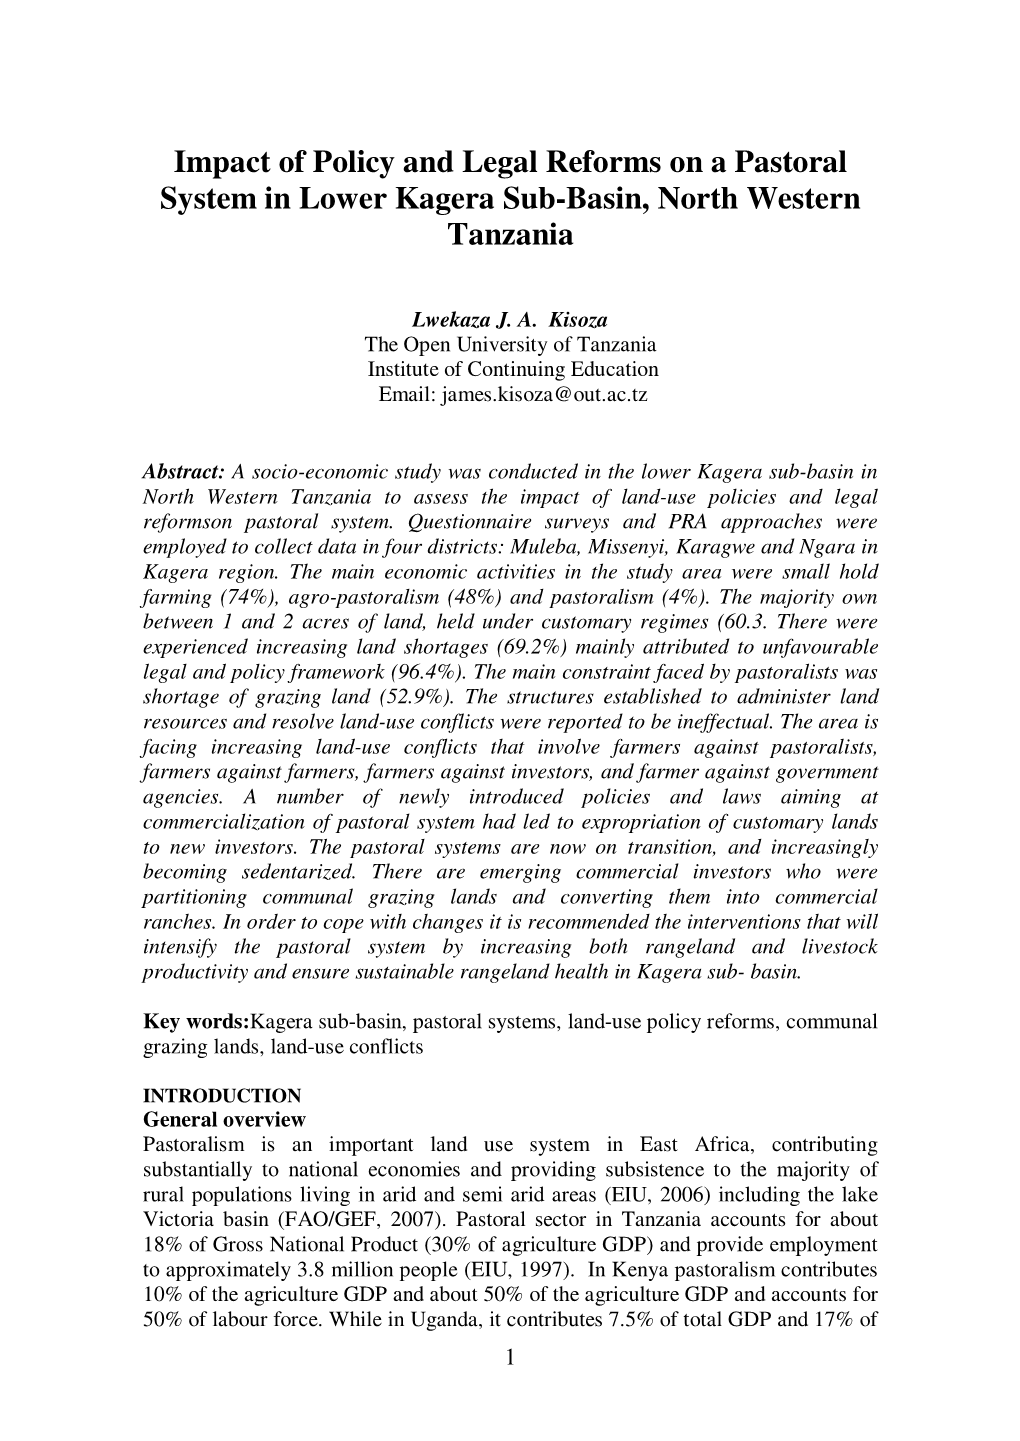 Impact of Policy and Legal Reforms on a Pastoral System in Lower Kagera Sub-Basin, North Western Tanzania